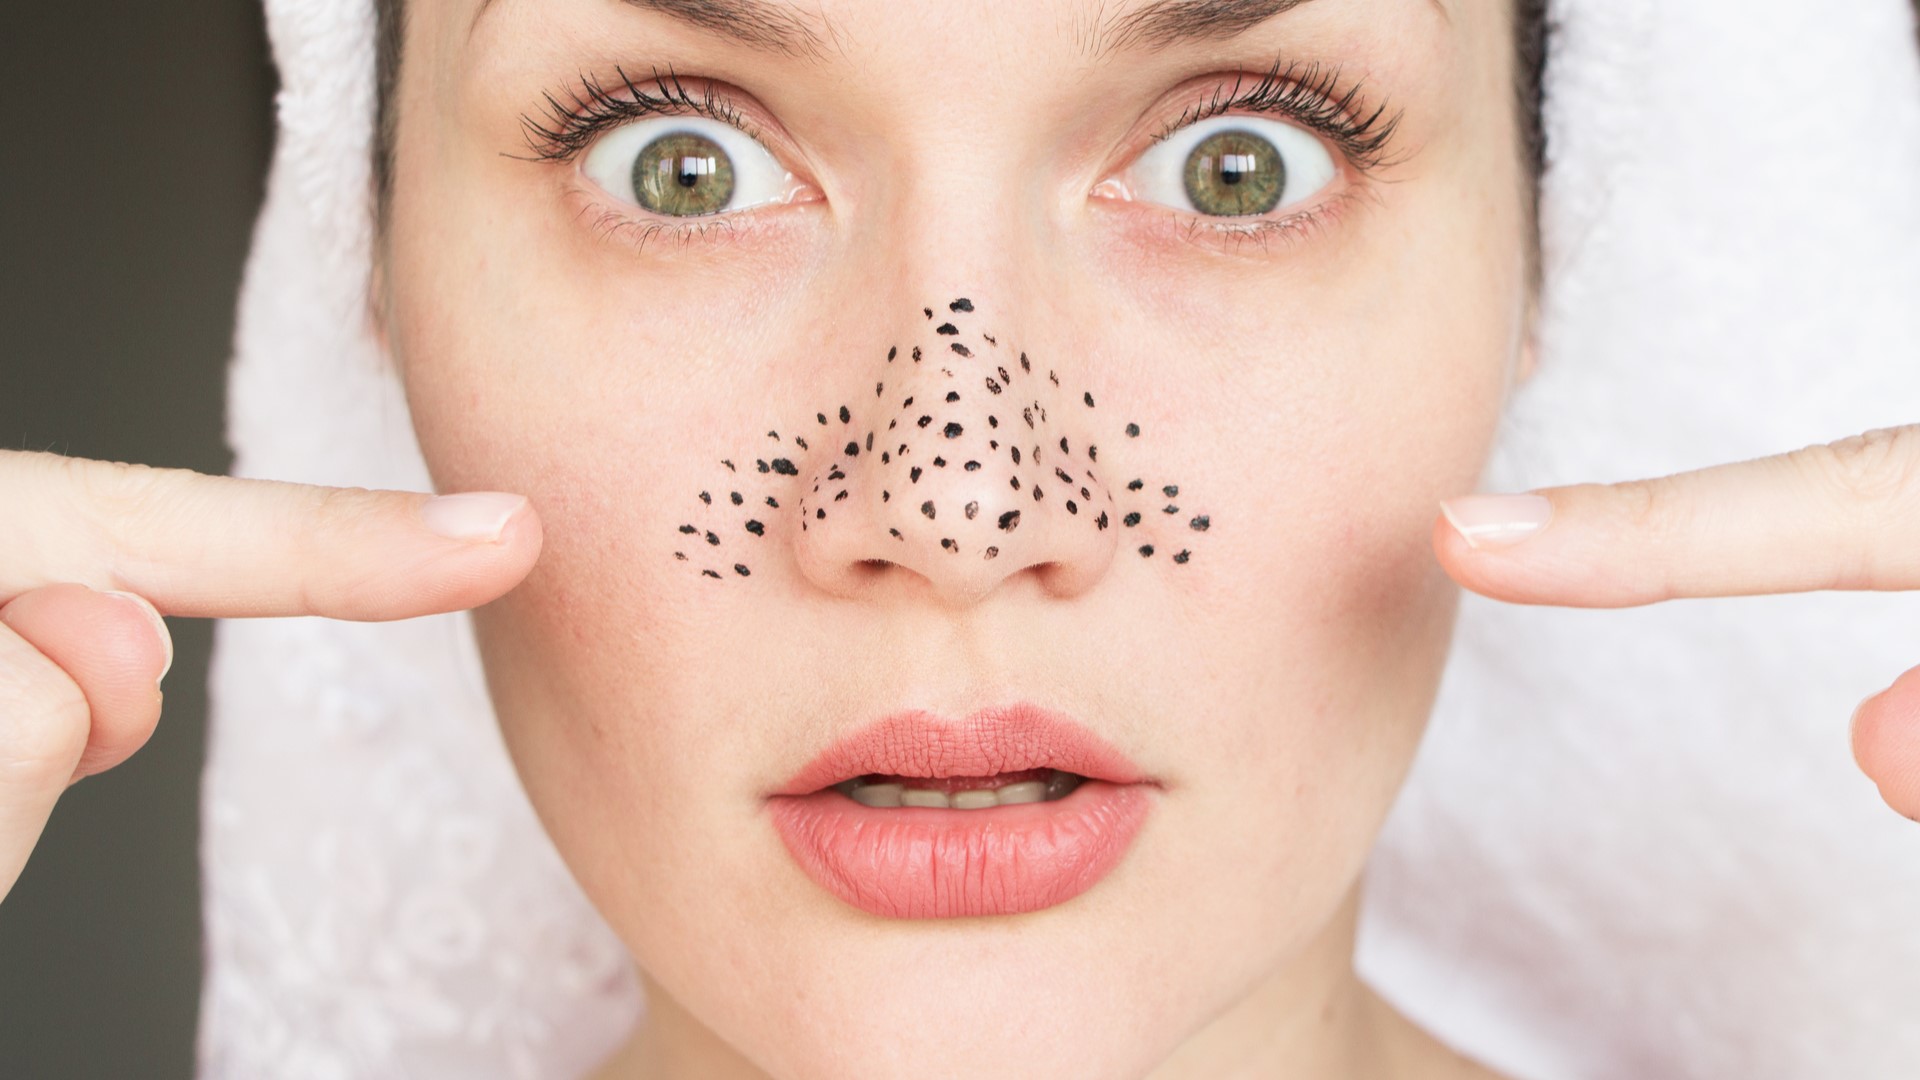 How To Clean Clogged Pores